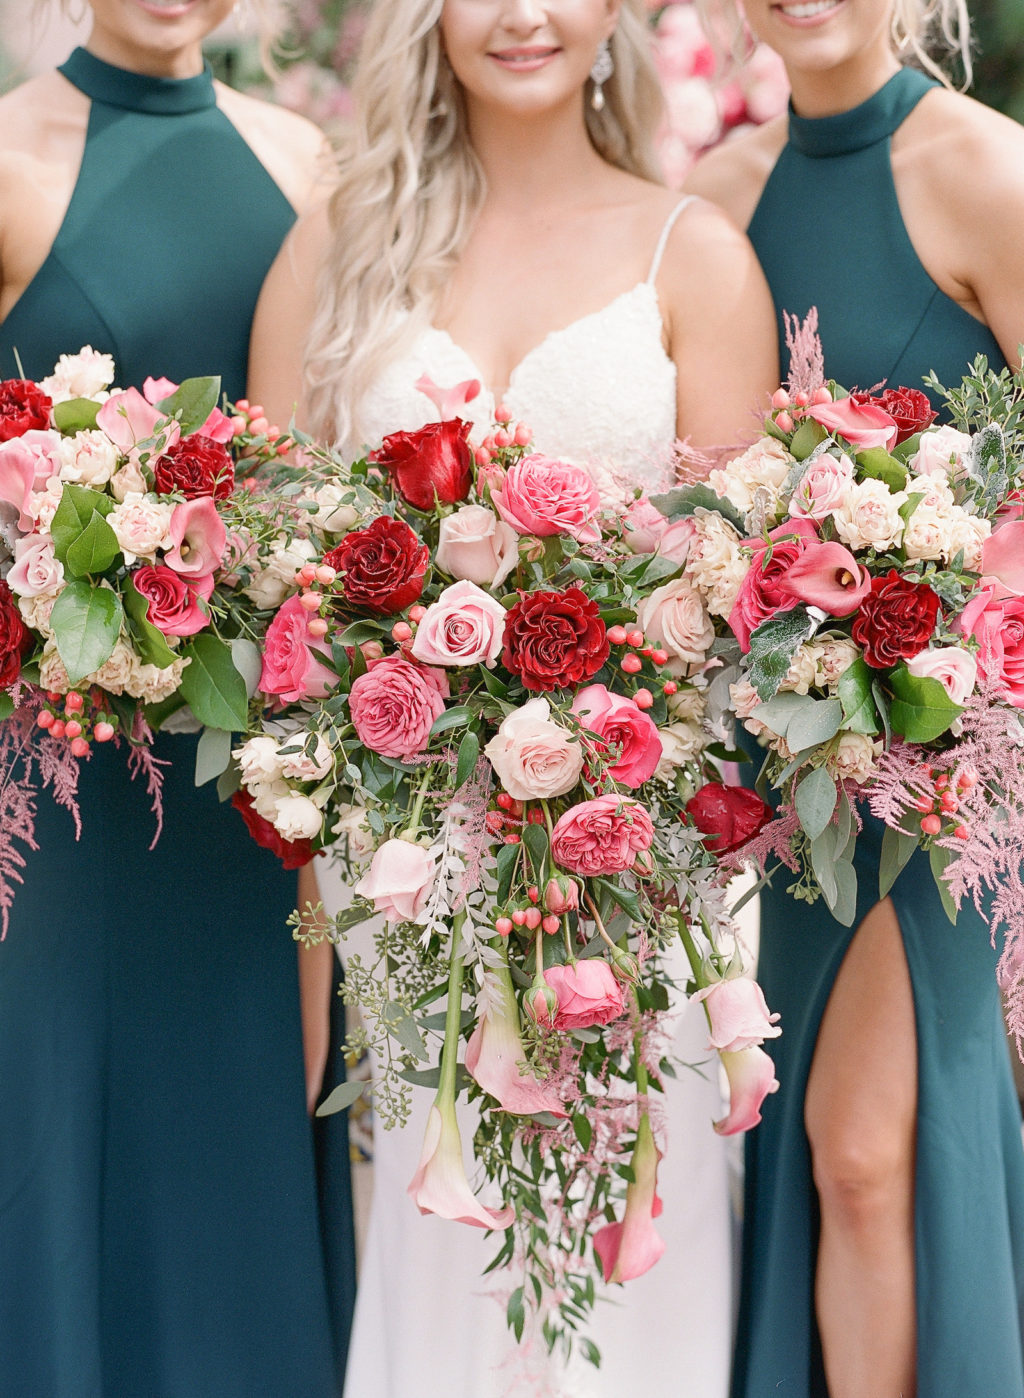 Elegant Bride with Bridesmaids in Emerald Green Dresses Holding Red, Pink and White Roses with Greenery Floral Bouquets Standing in Front of Courtyard Water Fountain with Floral Peacock Statue with Pink, White and Purple Lush Floral Tail | St. Pete Wedding Venue The Vinoy Renaissance | Tampa Bay Wedding Hair and Makeup Femme Akoi Beauty Studio